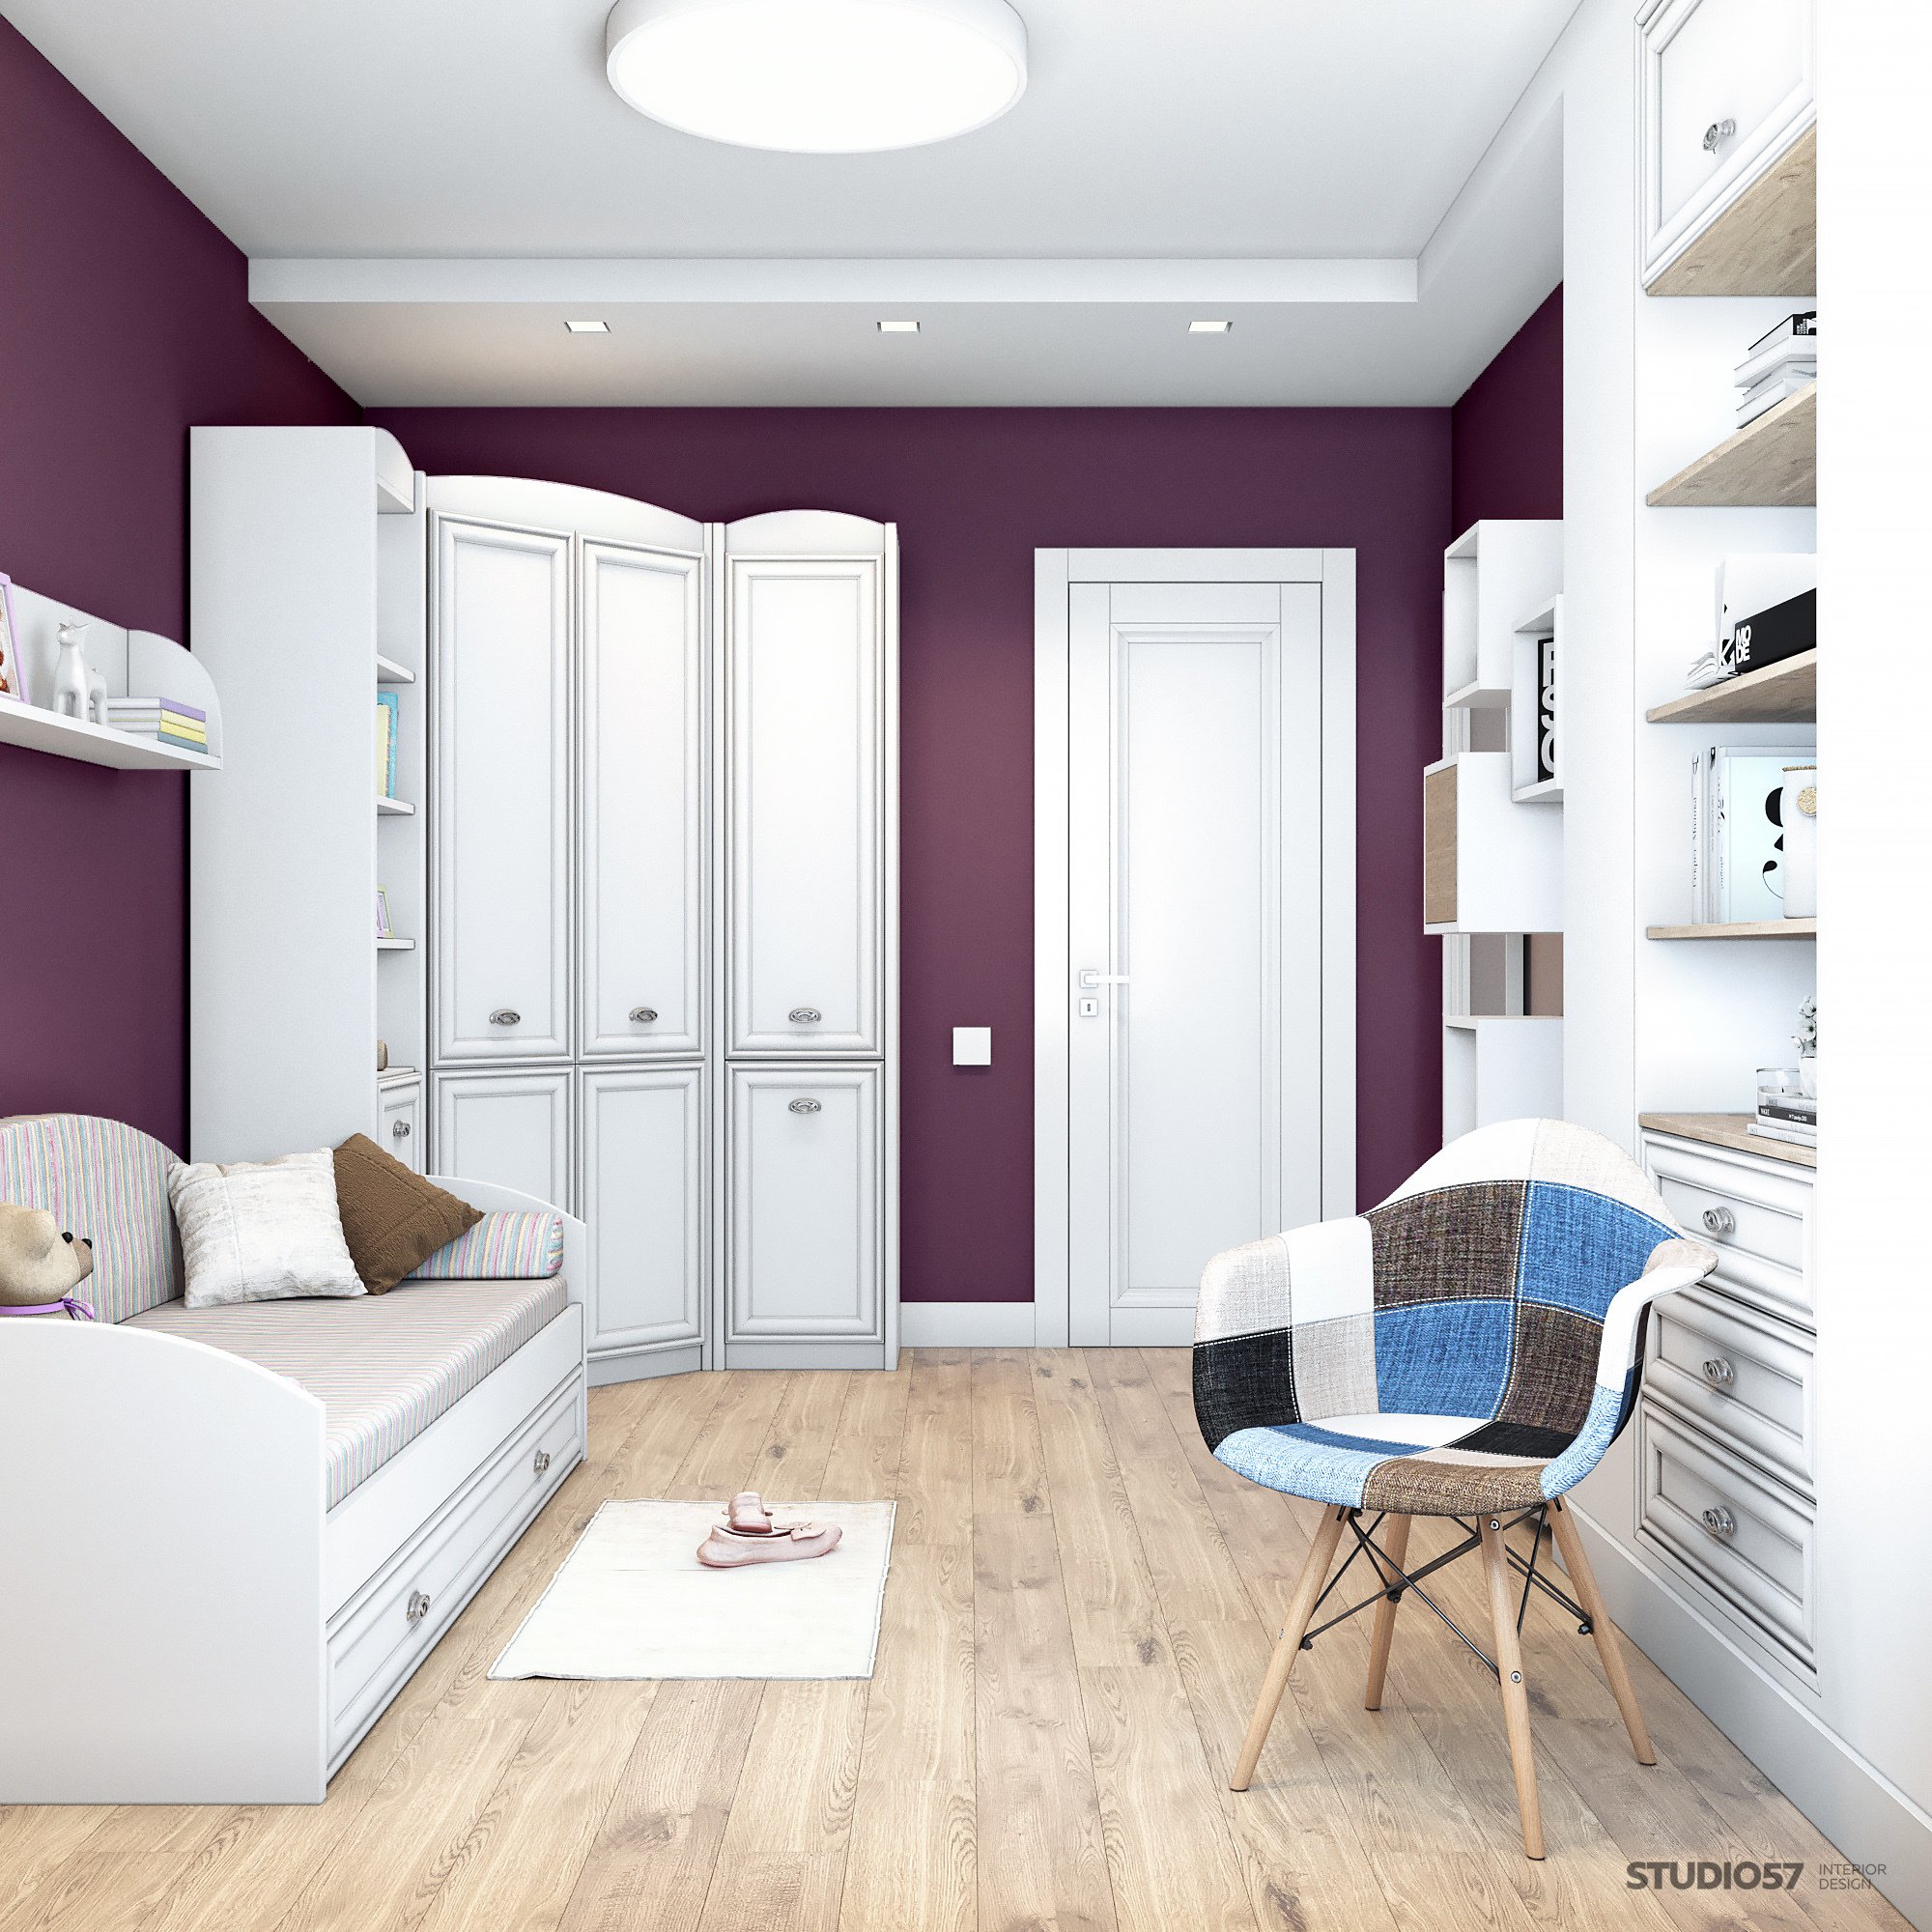 Children's room in the Style of Contemporary Photo